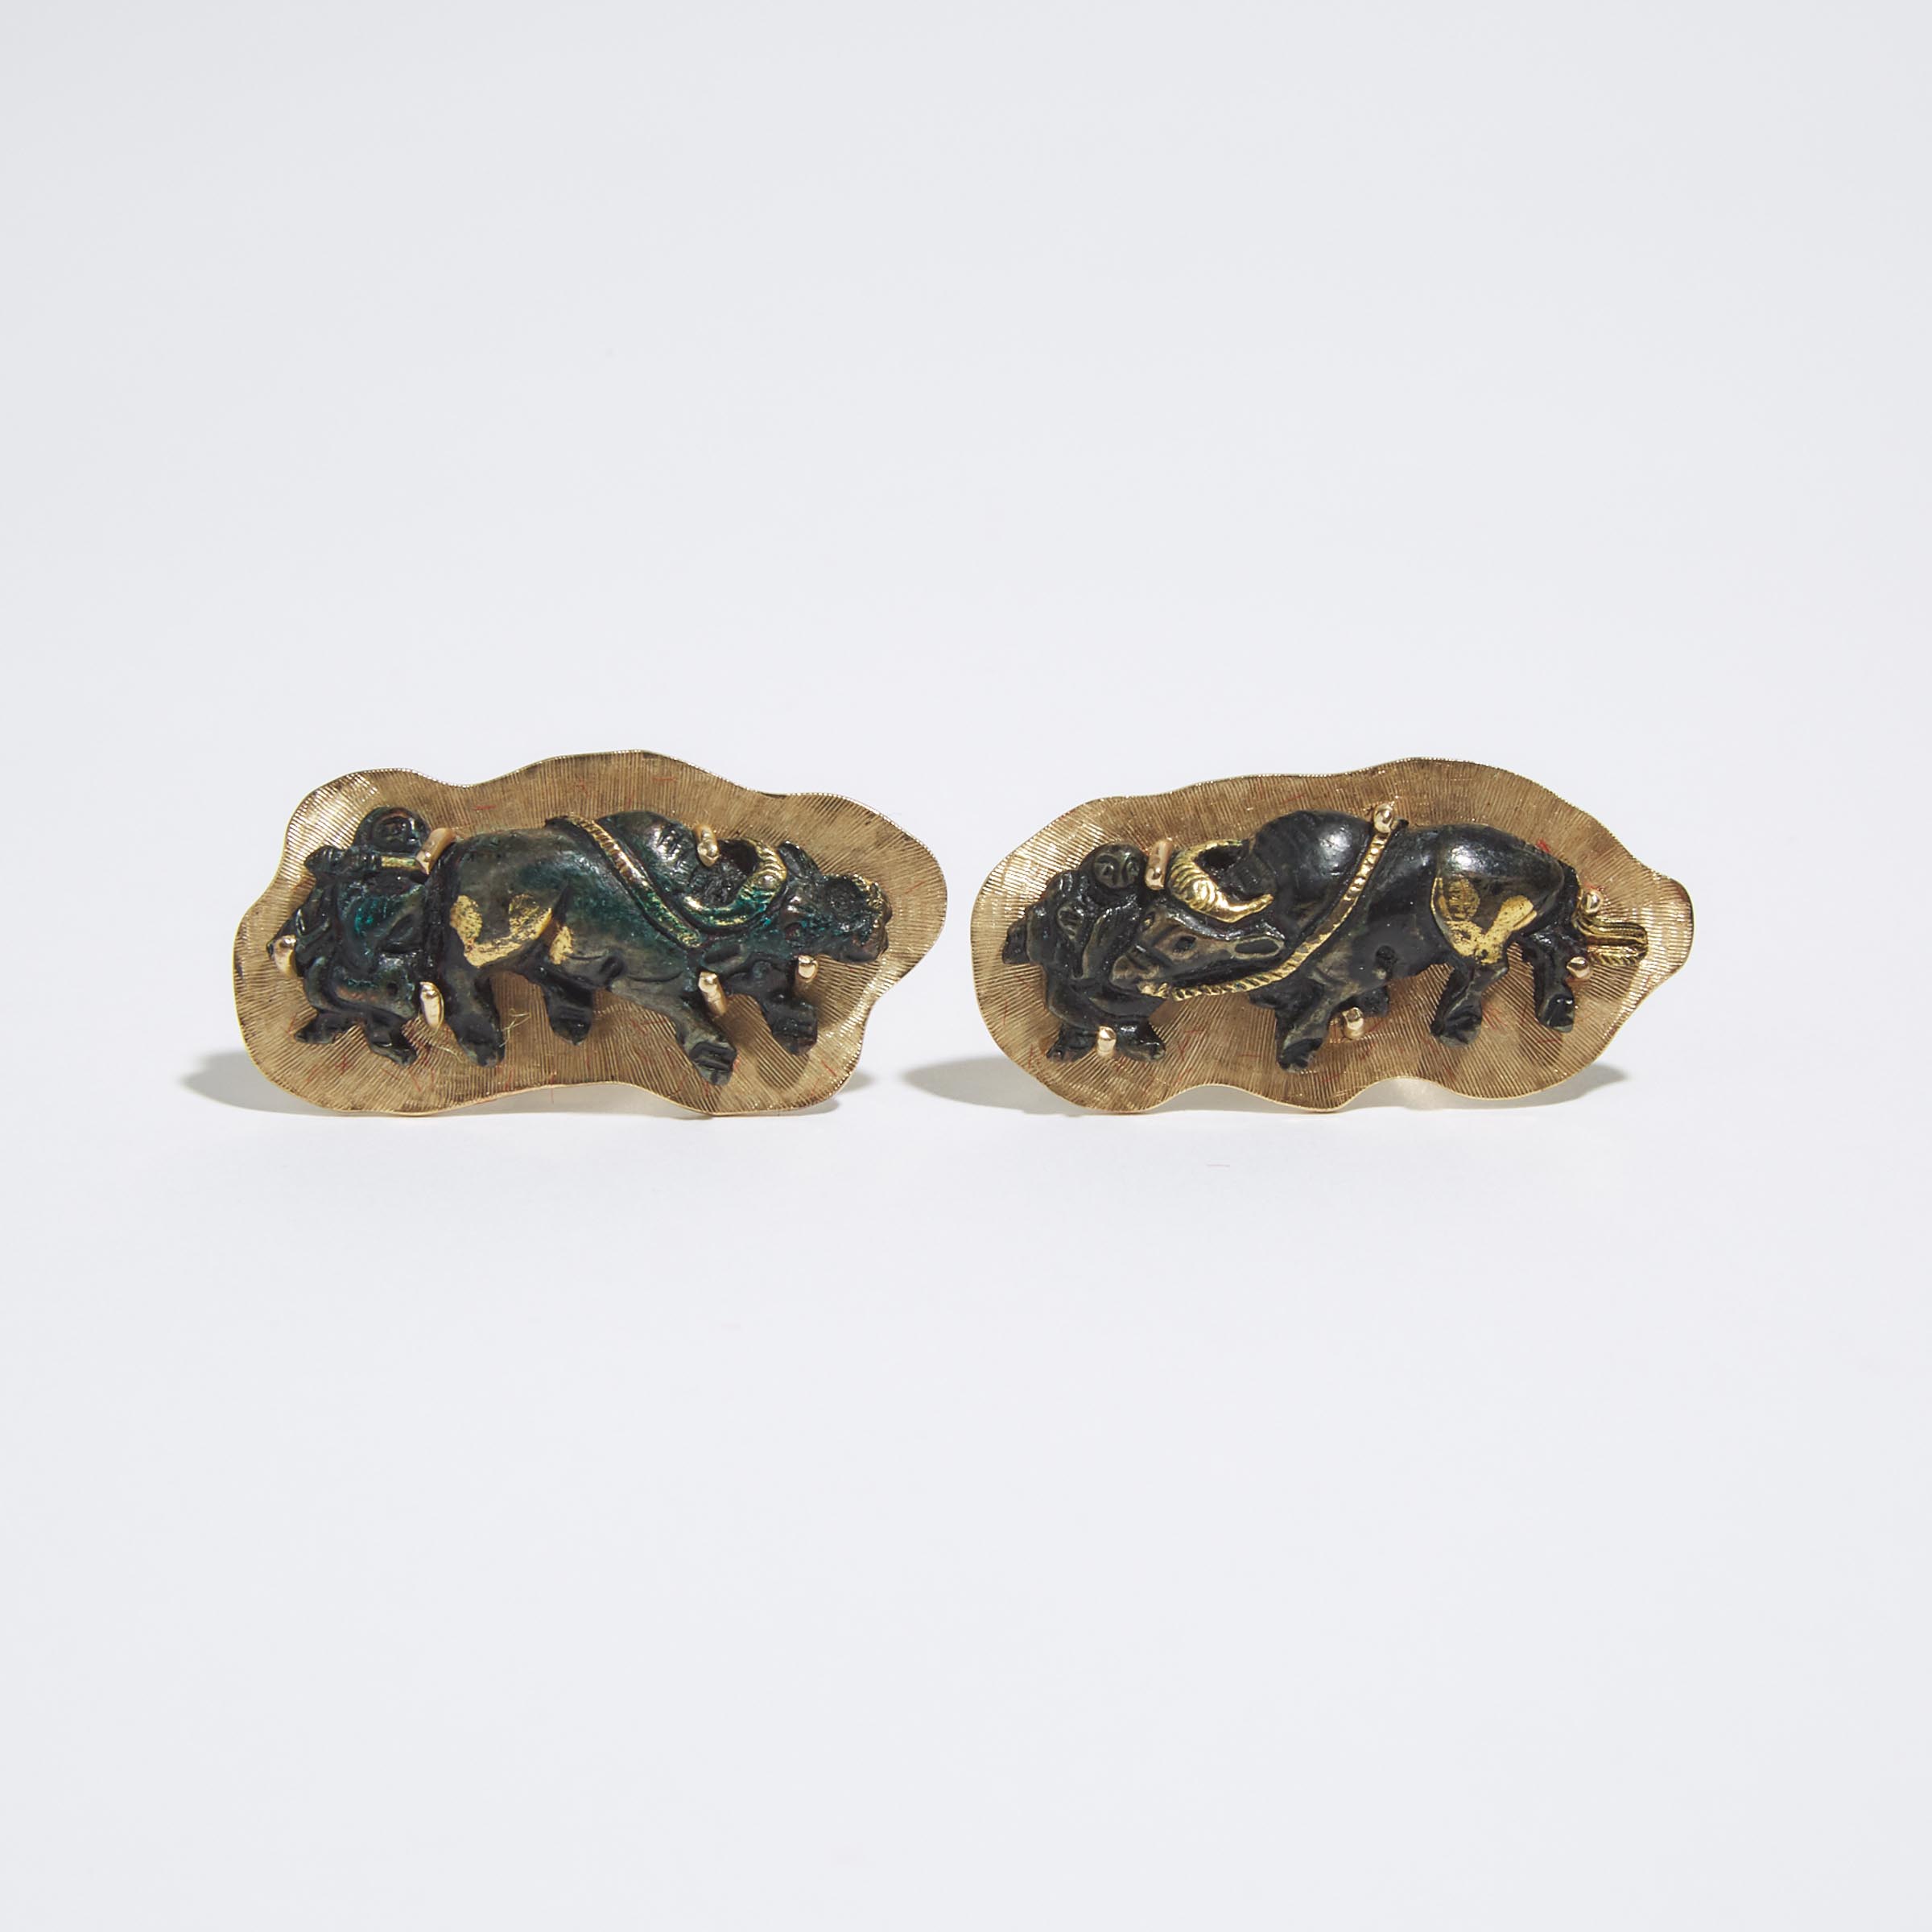 A Pair of 'Boy and Buffalo' Menuki Mounted on 14k Gold Cuff Links